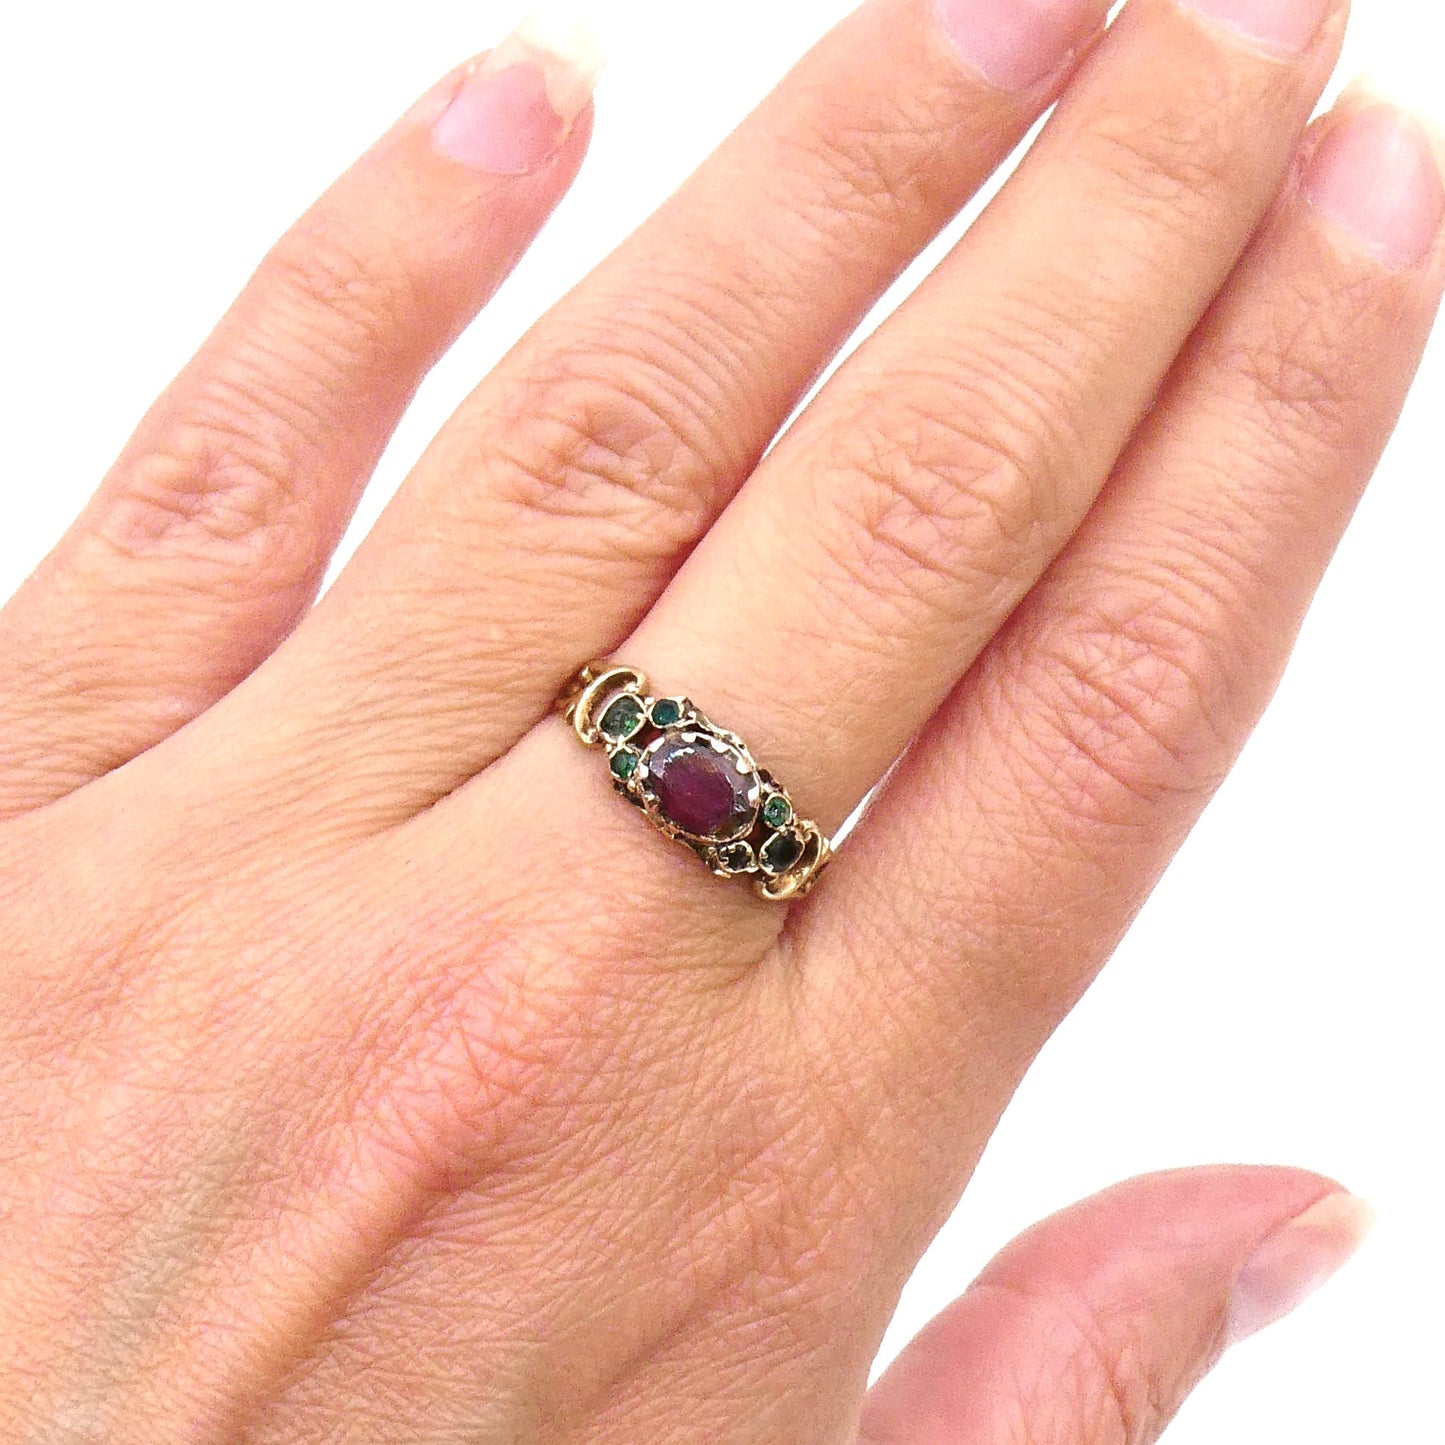 Antique garnet and emerald ring with open work shoulders, an ornate victorian ring. - Collected